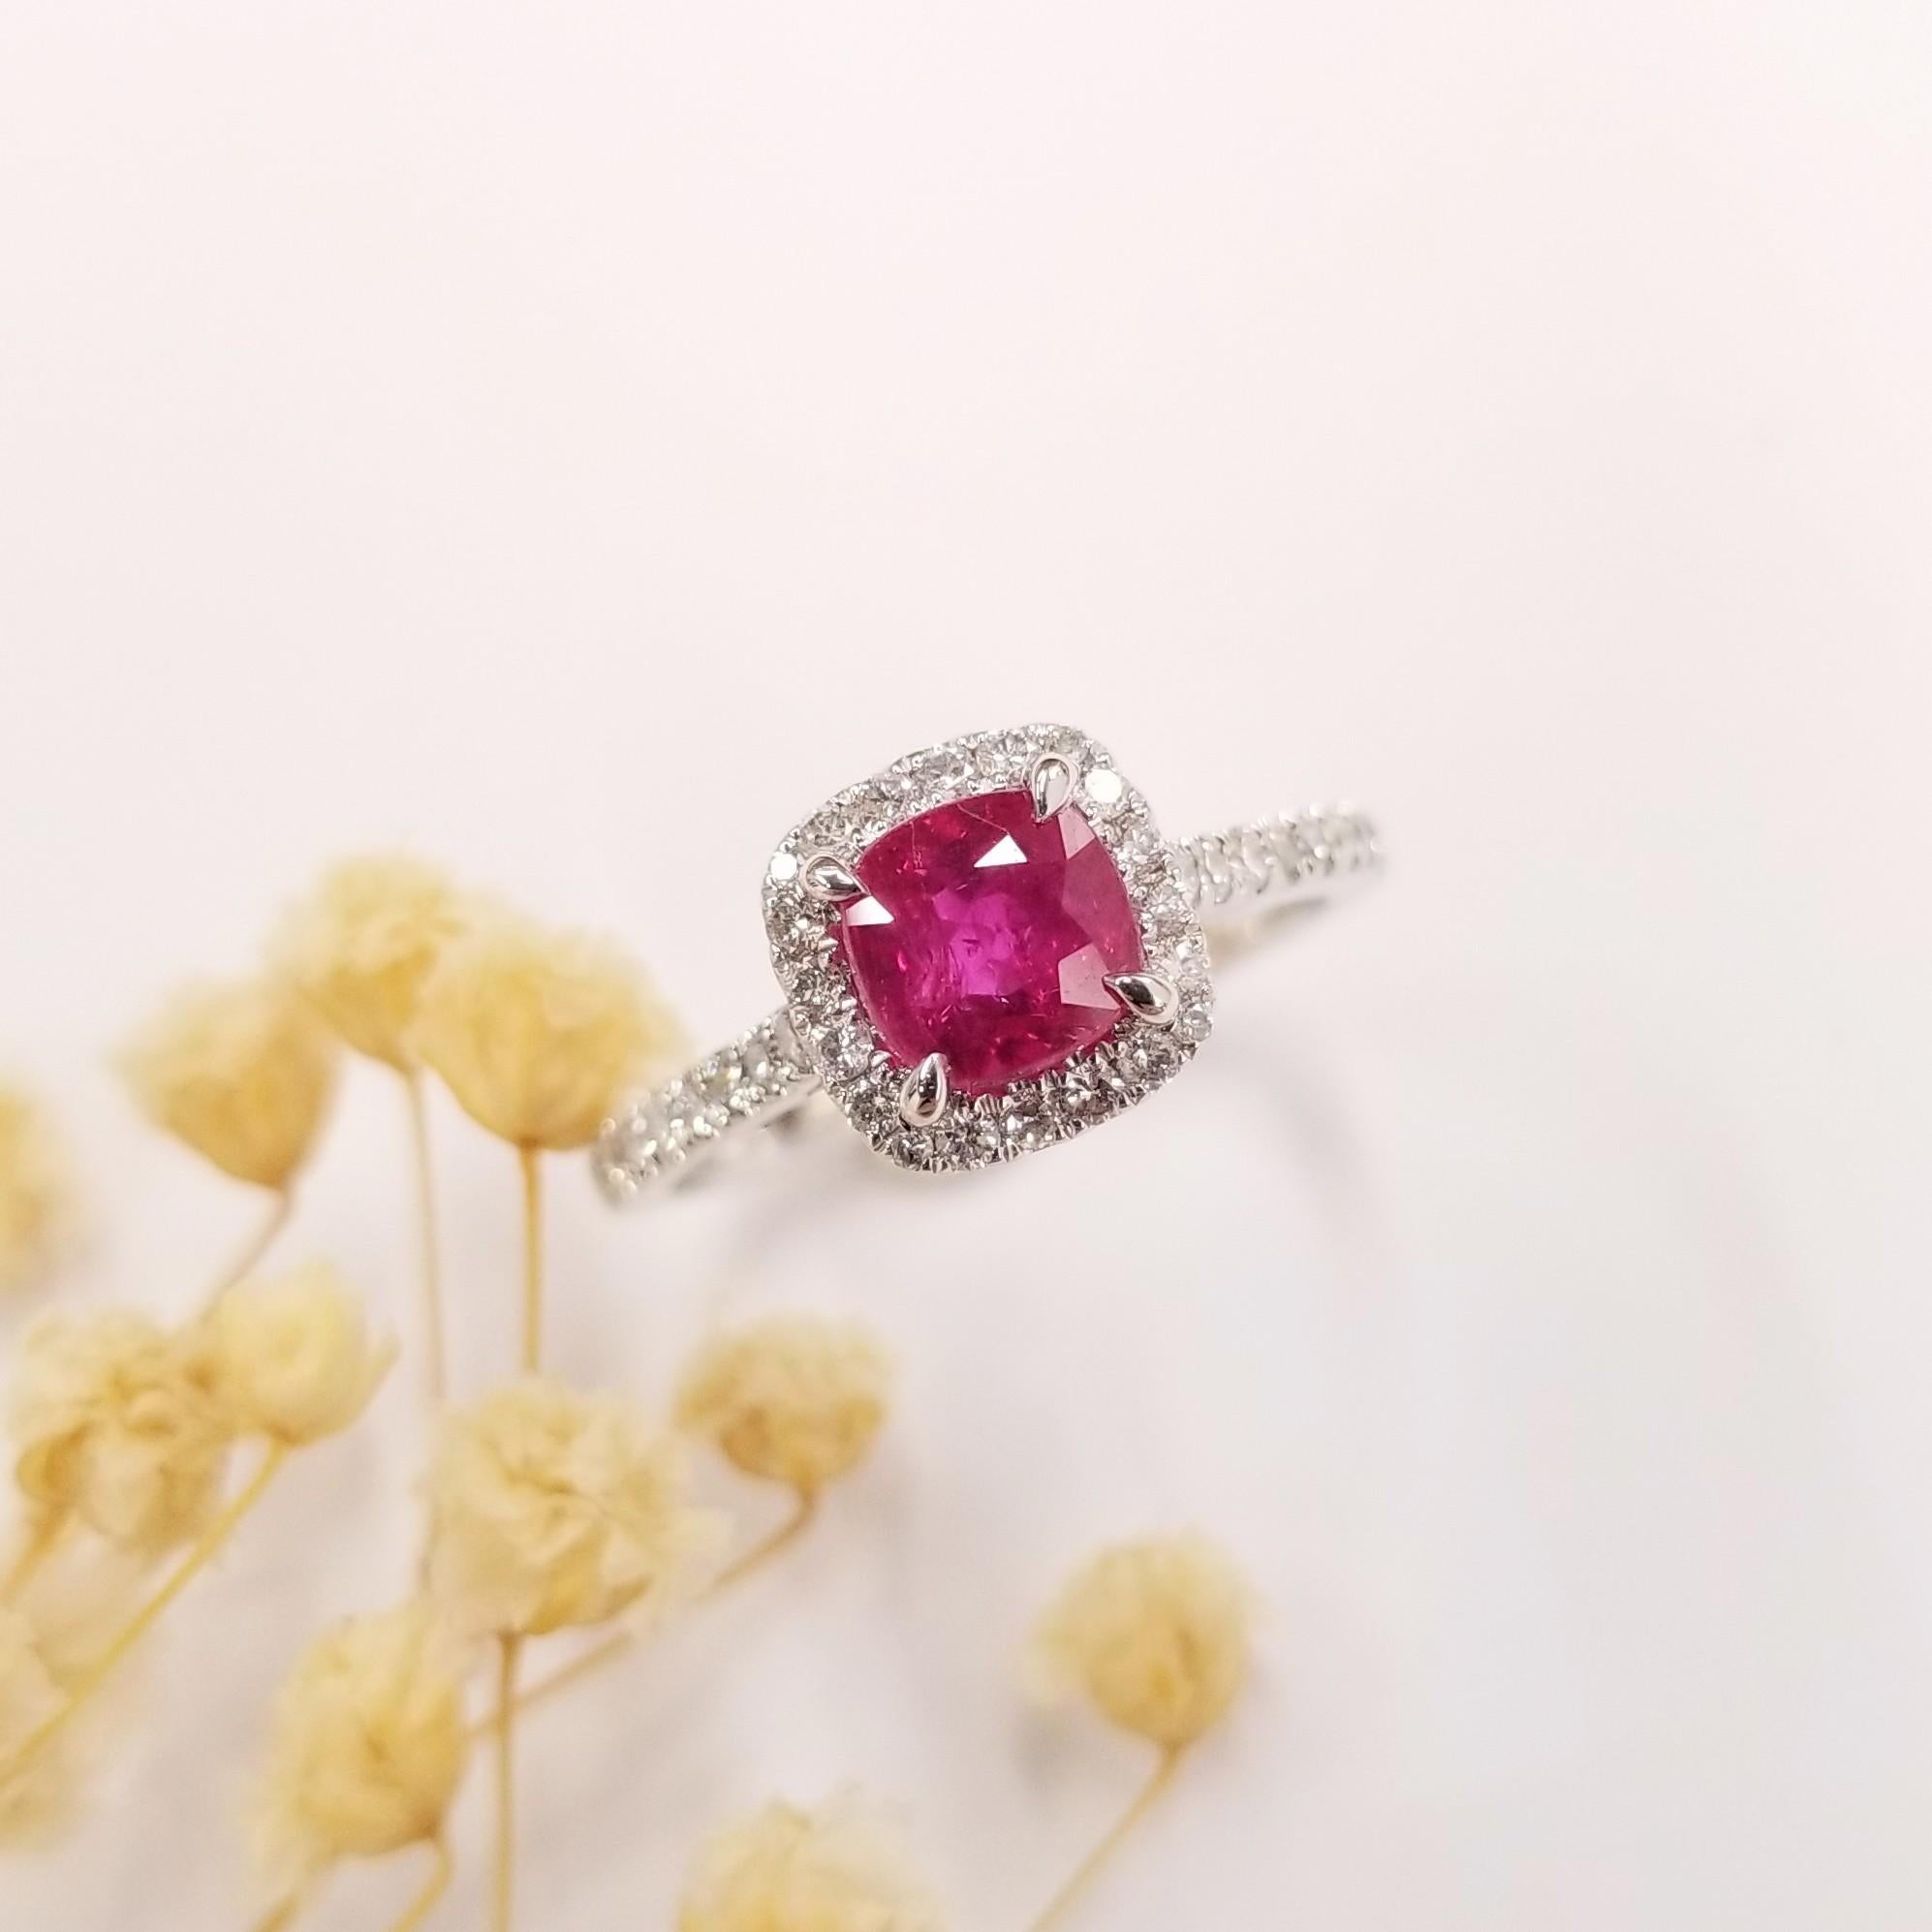 This exquisite ring is crafted in 18K White Gold, adding a touch of elegance and sophistication to any ensemble.

The center of attention is the breathtaking 1.26 Carat intense pink red natural ruby, skillfully cut in a cushion shape. This gemstone